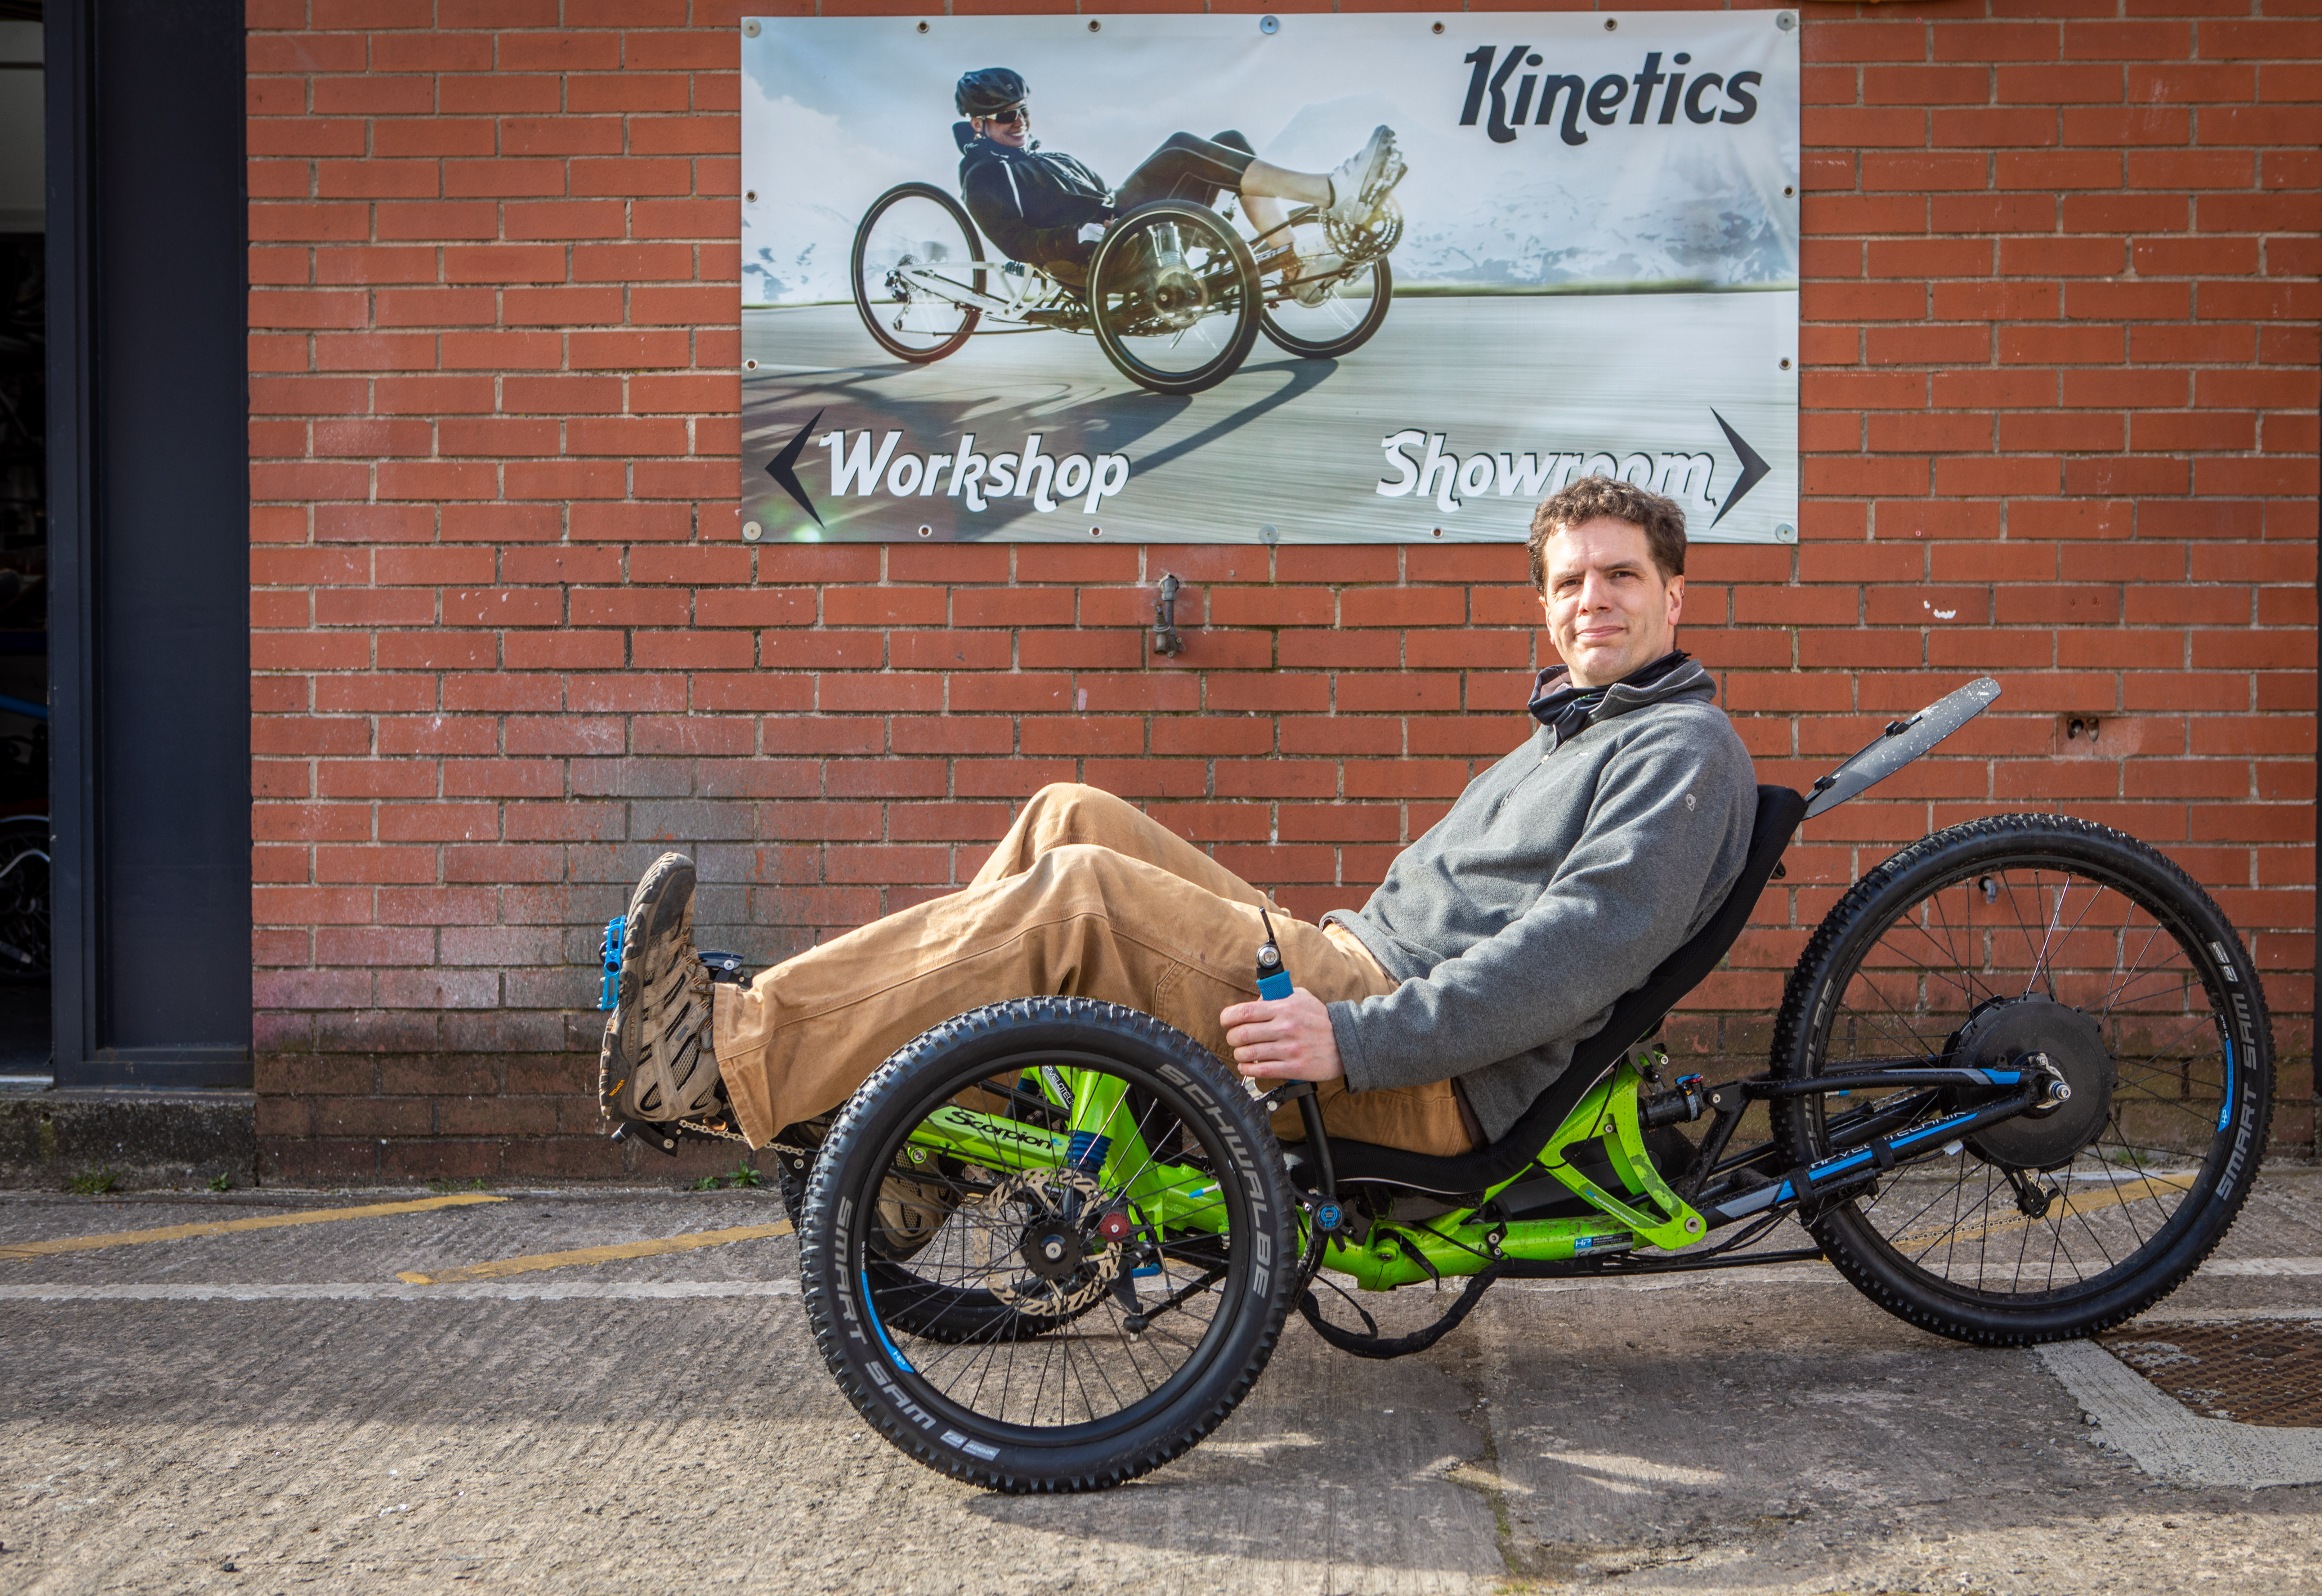 Queens Cross helps Glasgow cycle firm peddle its way to international expansion